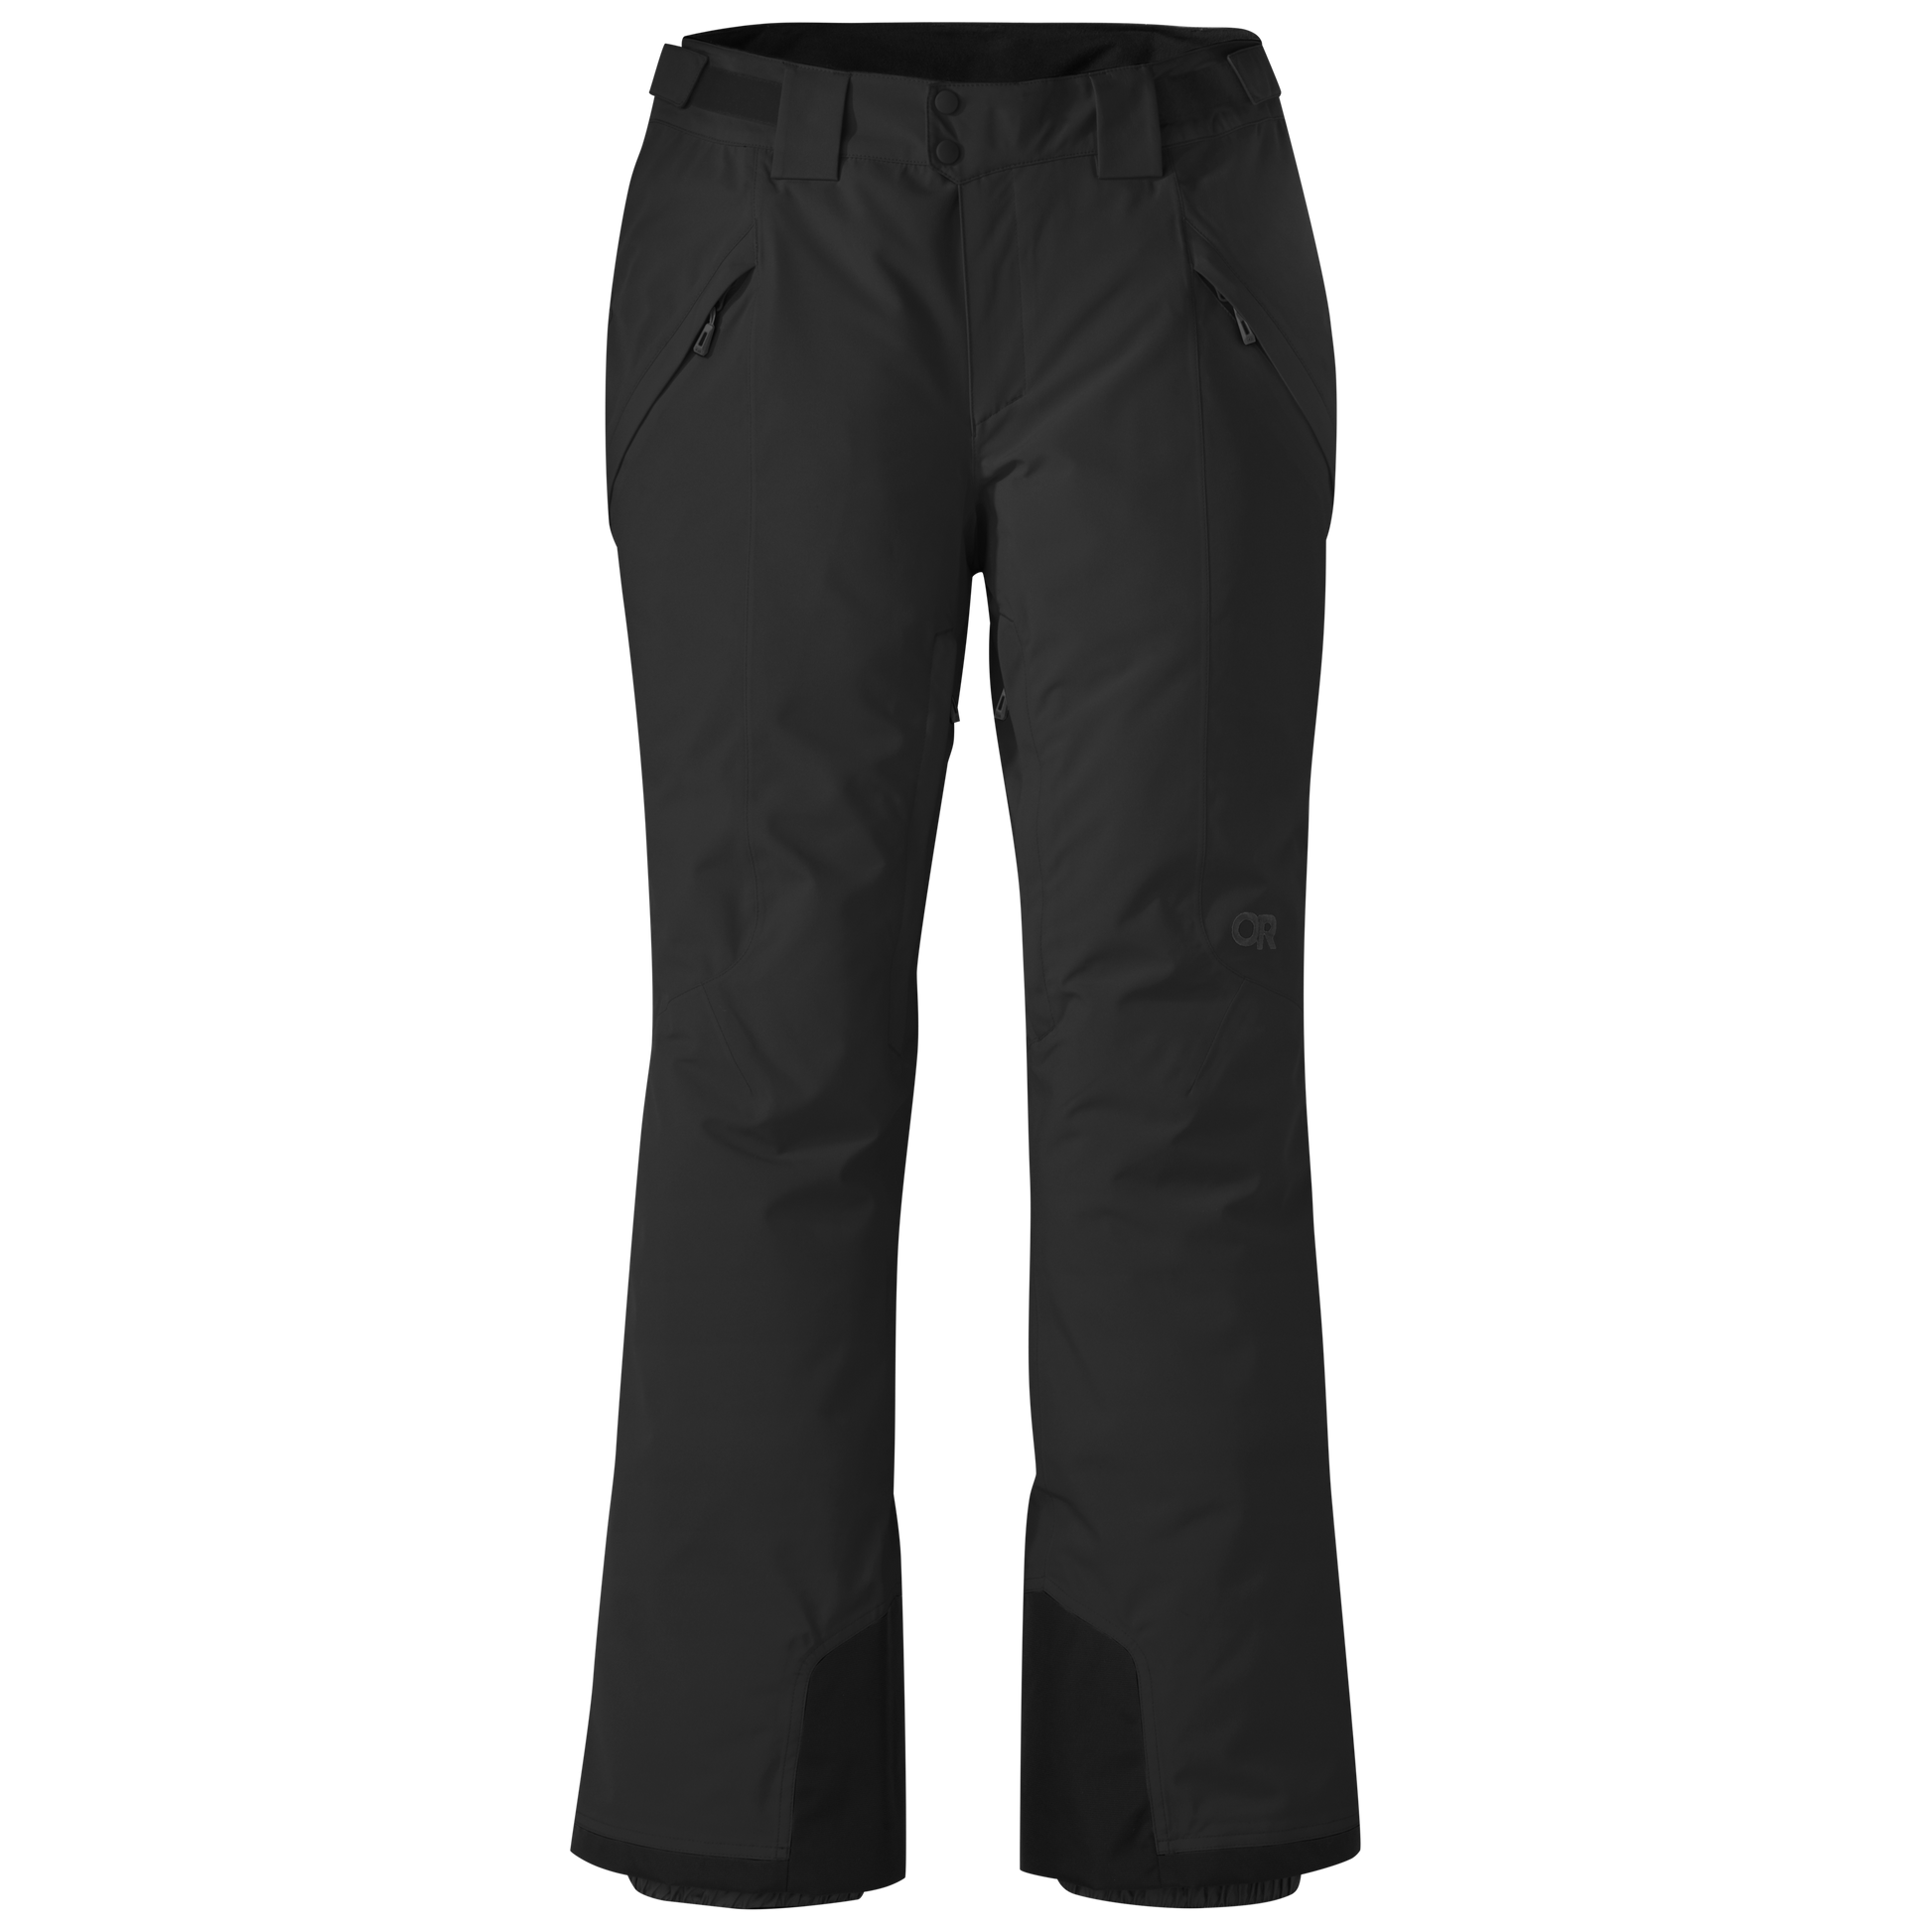 The North Face Extreme Gear Snow Pants Women's Size 12 Black Zip Sides